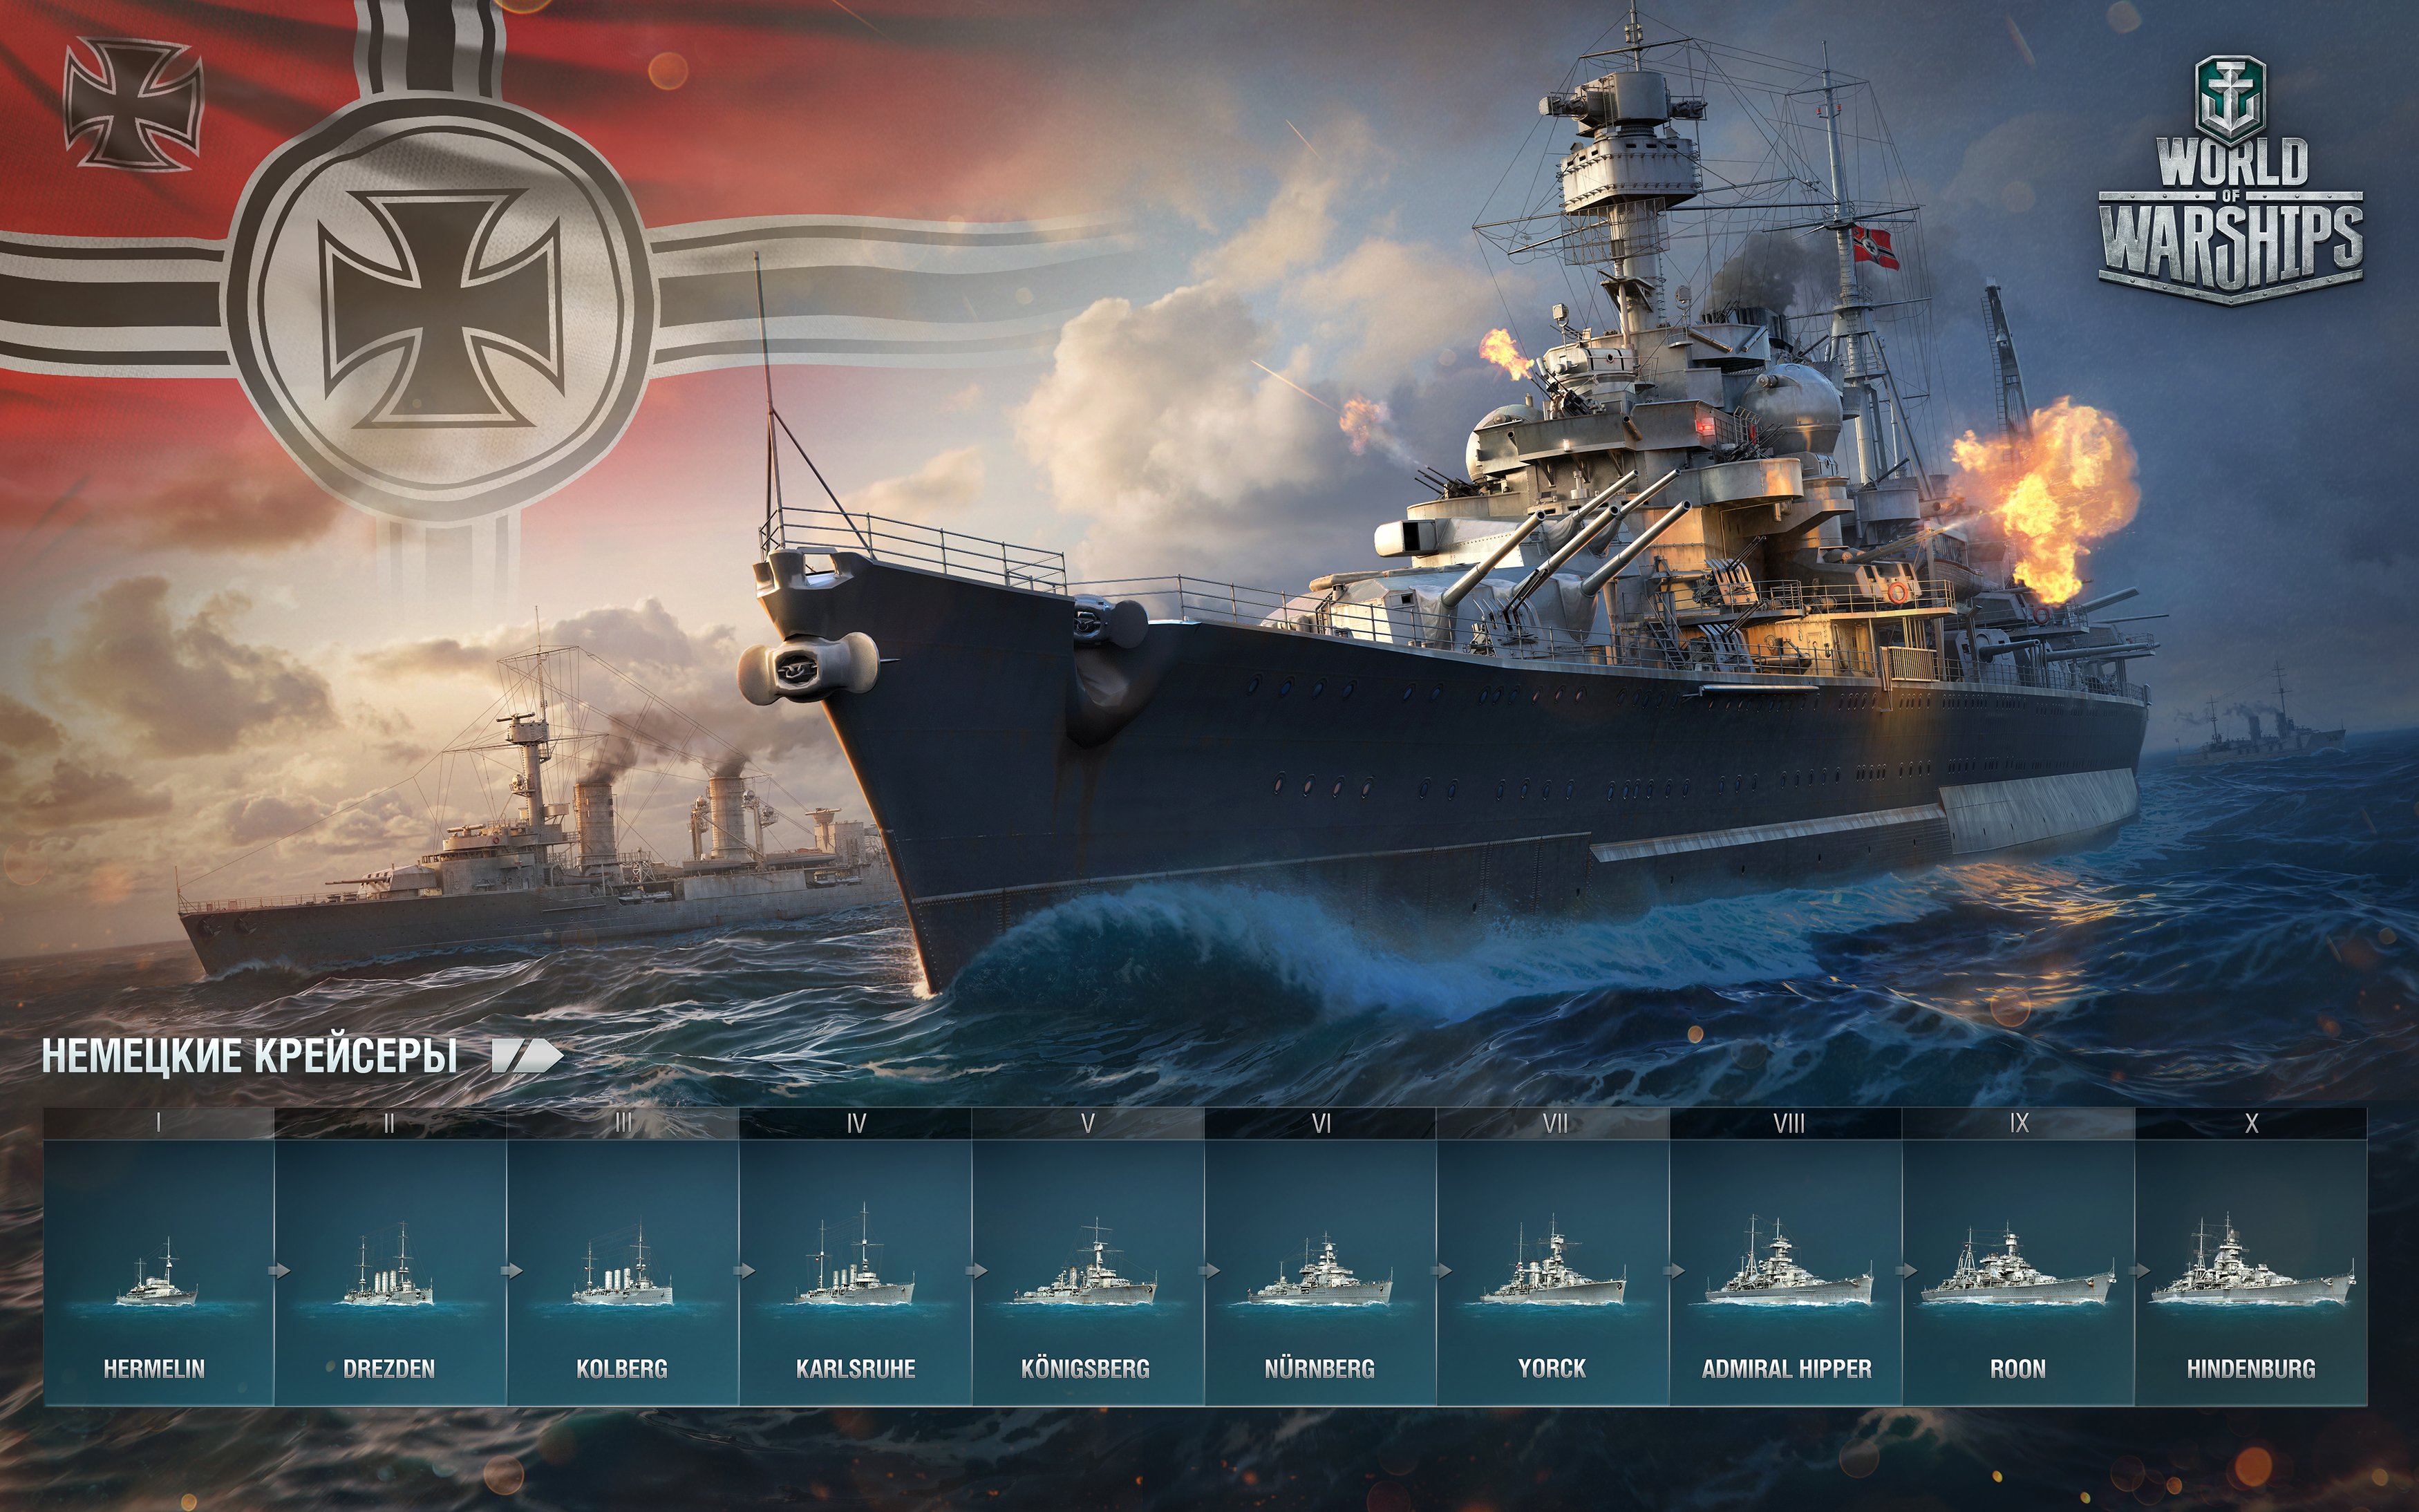 download world of warships launcher